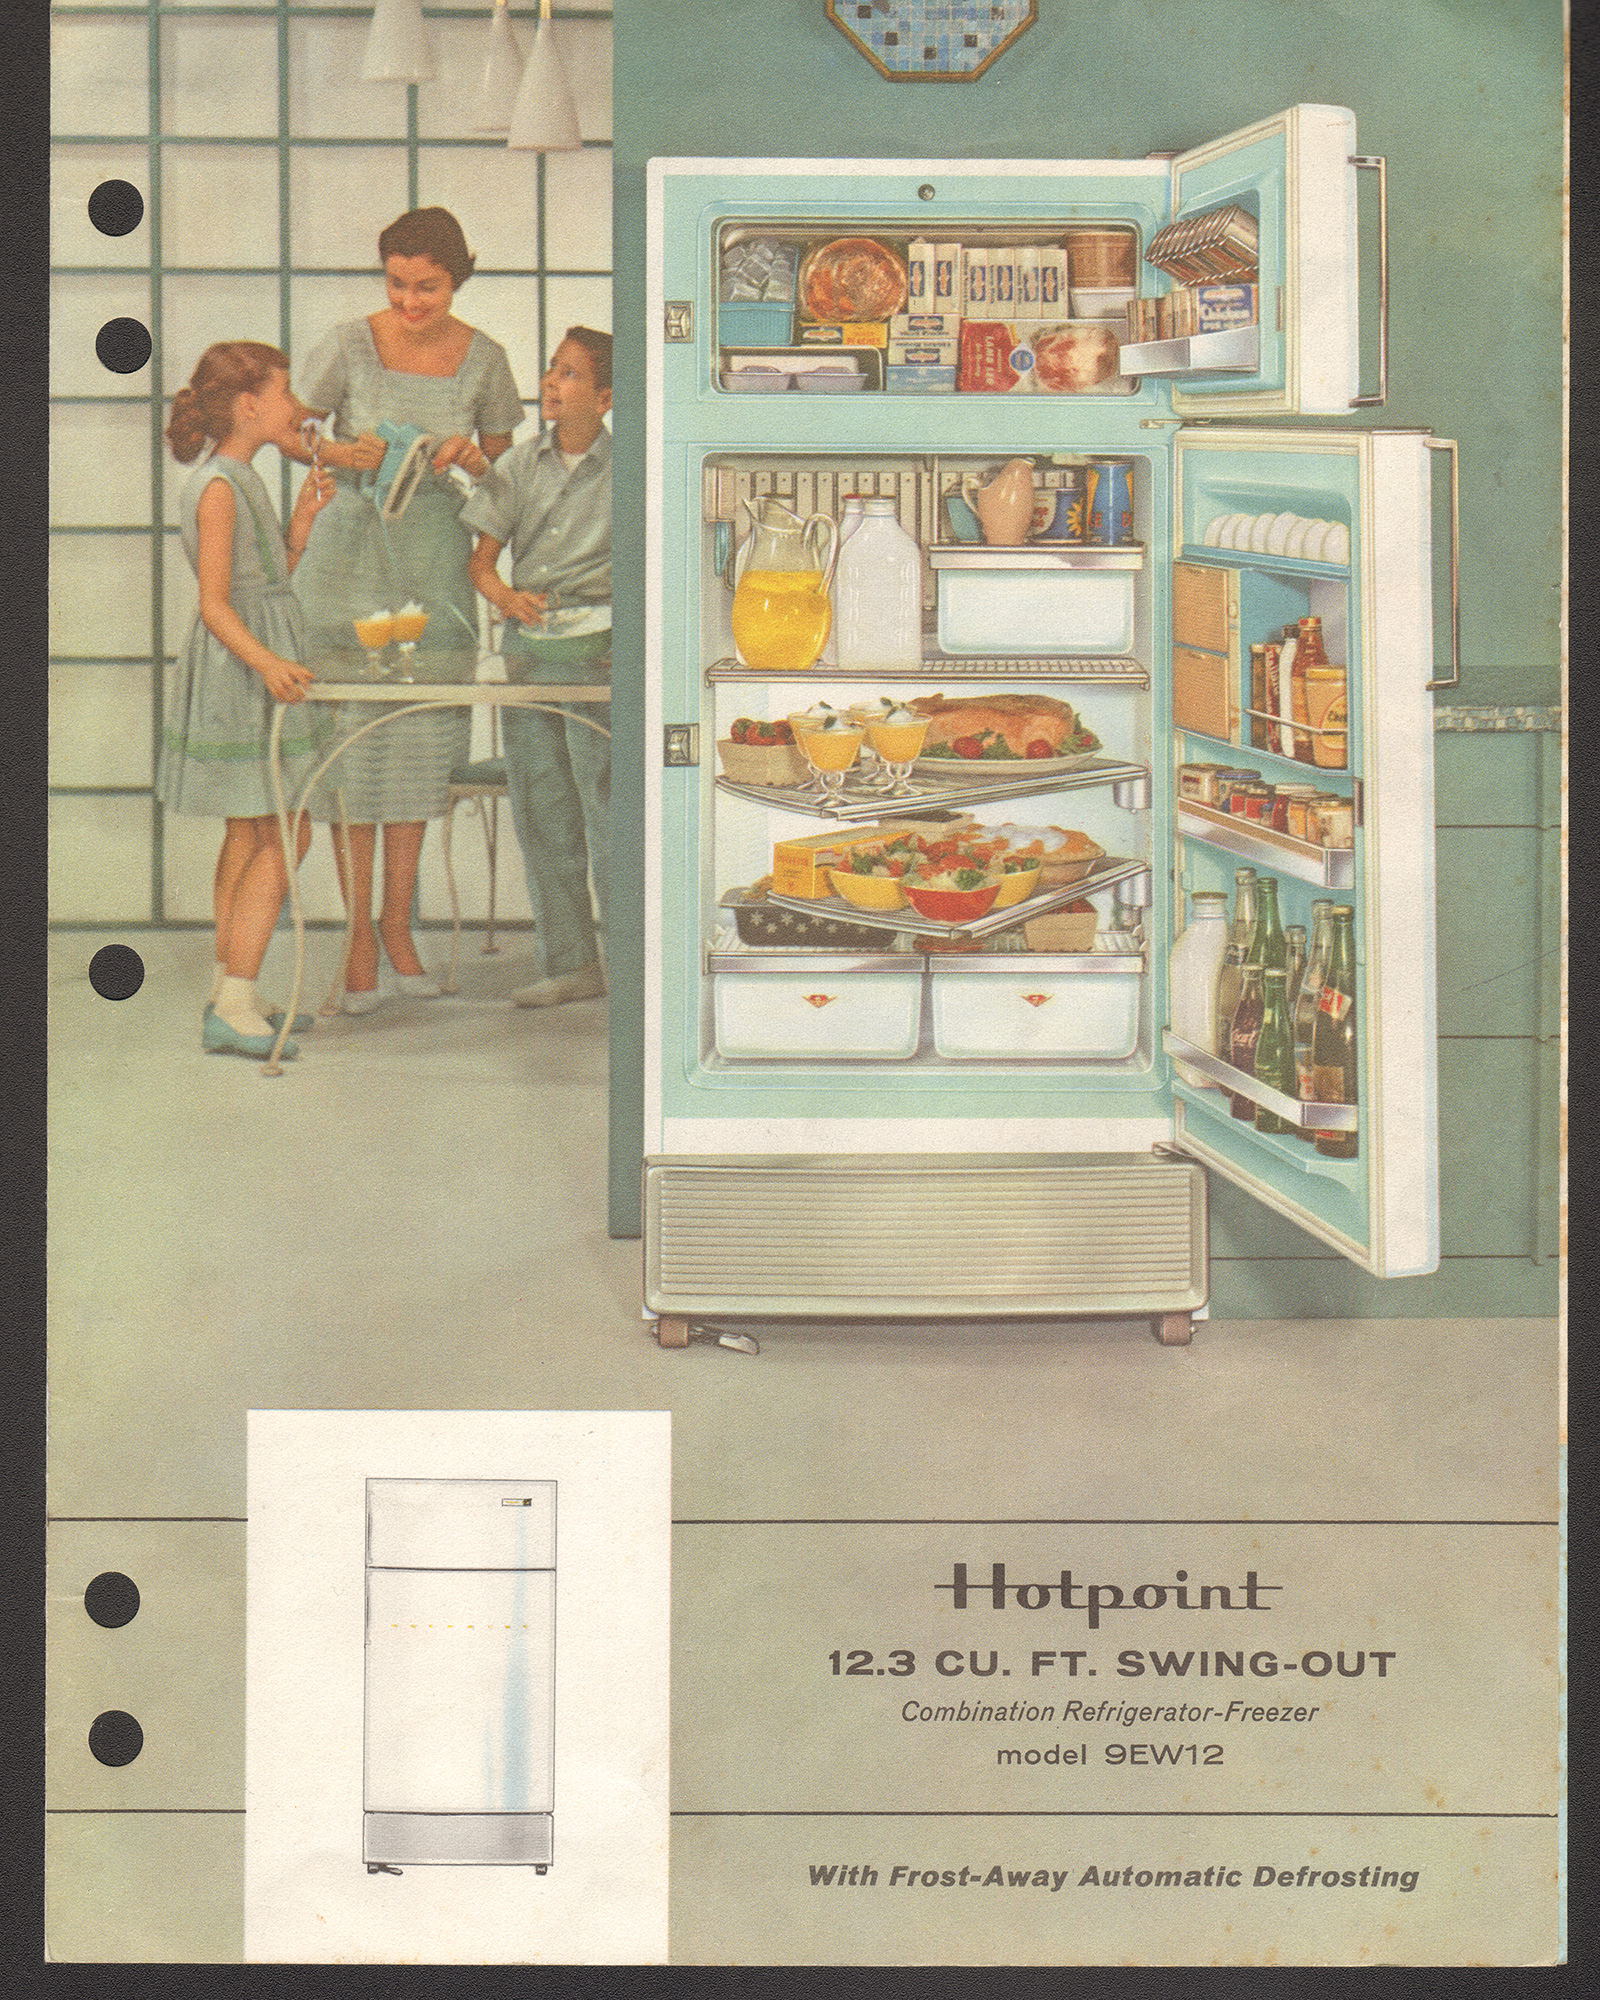 Hotpoint Refrigerator and product literature, 1959 – 1961